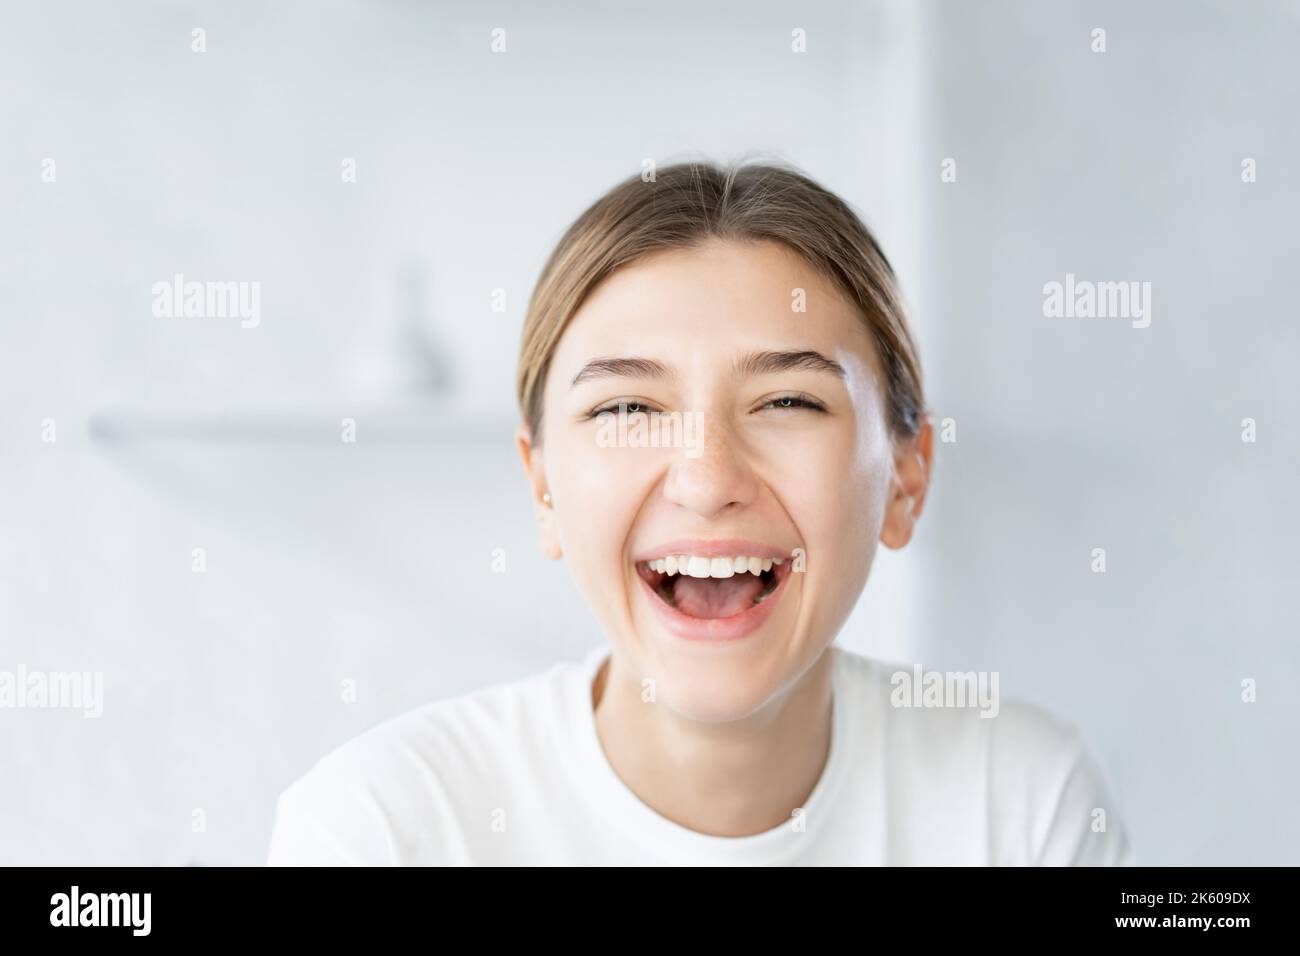 laughing woman dental care smiling model face Stock Photo